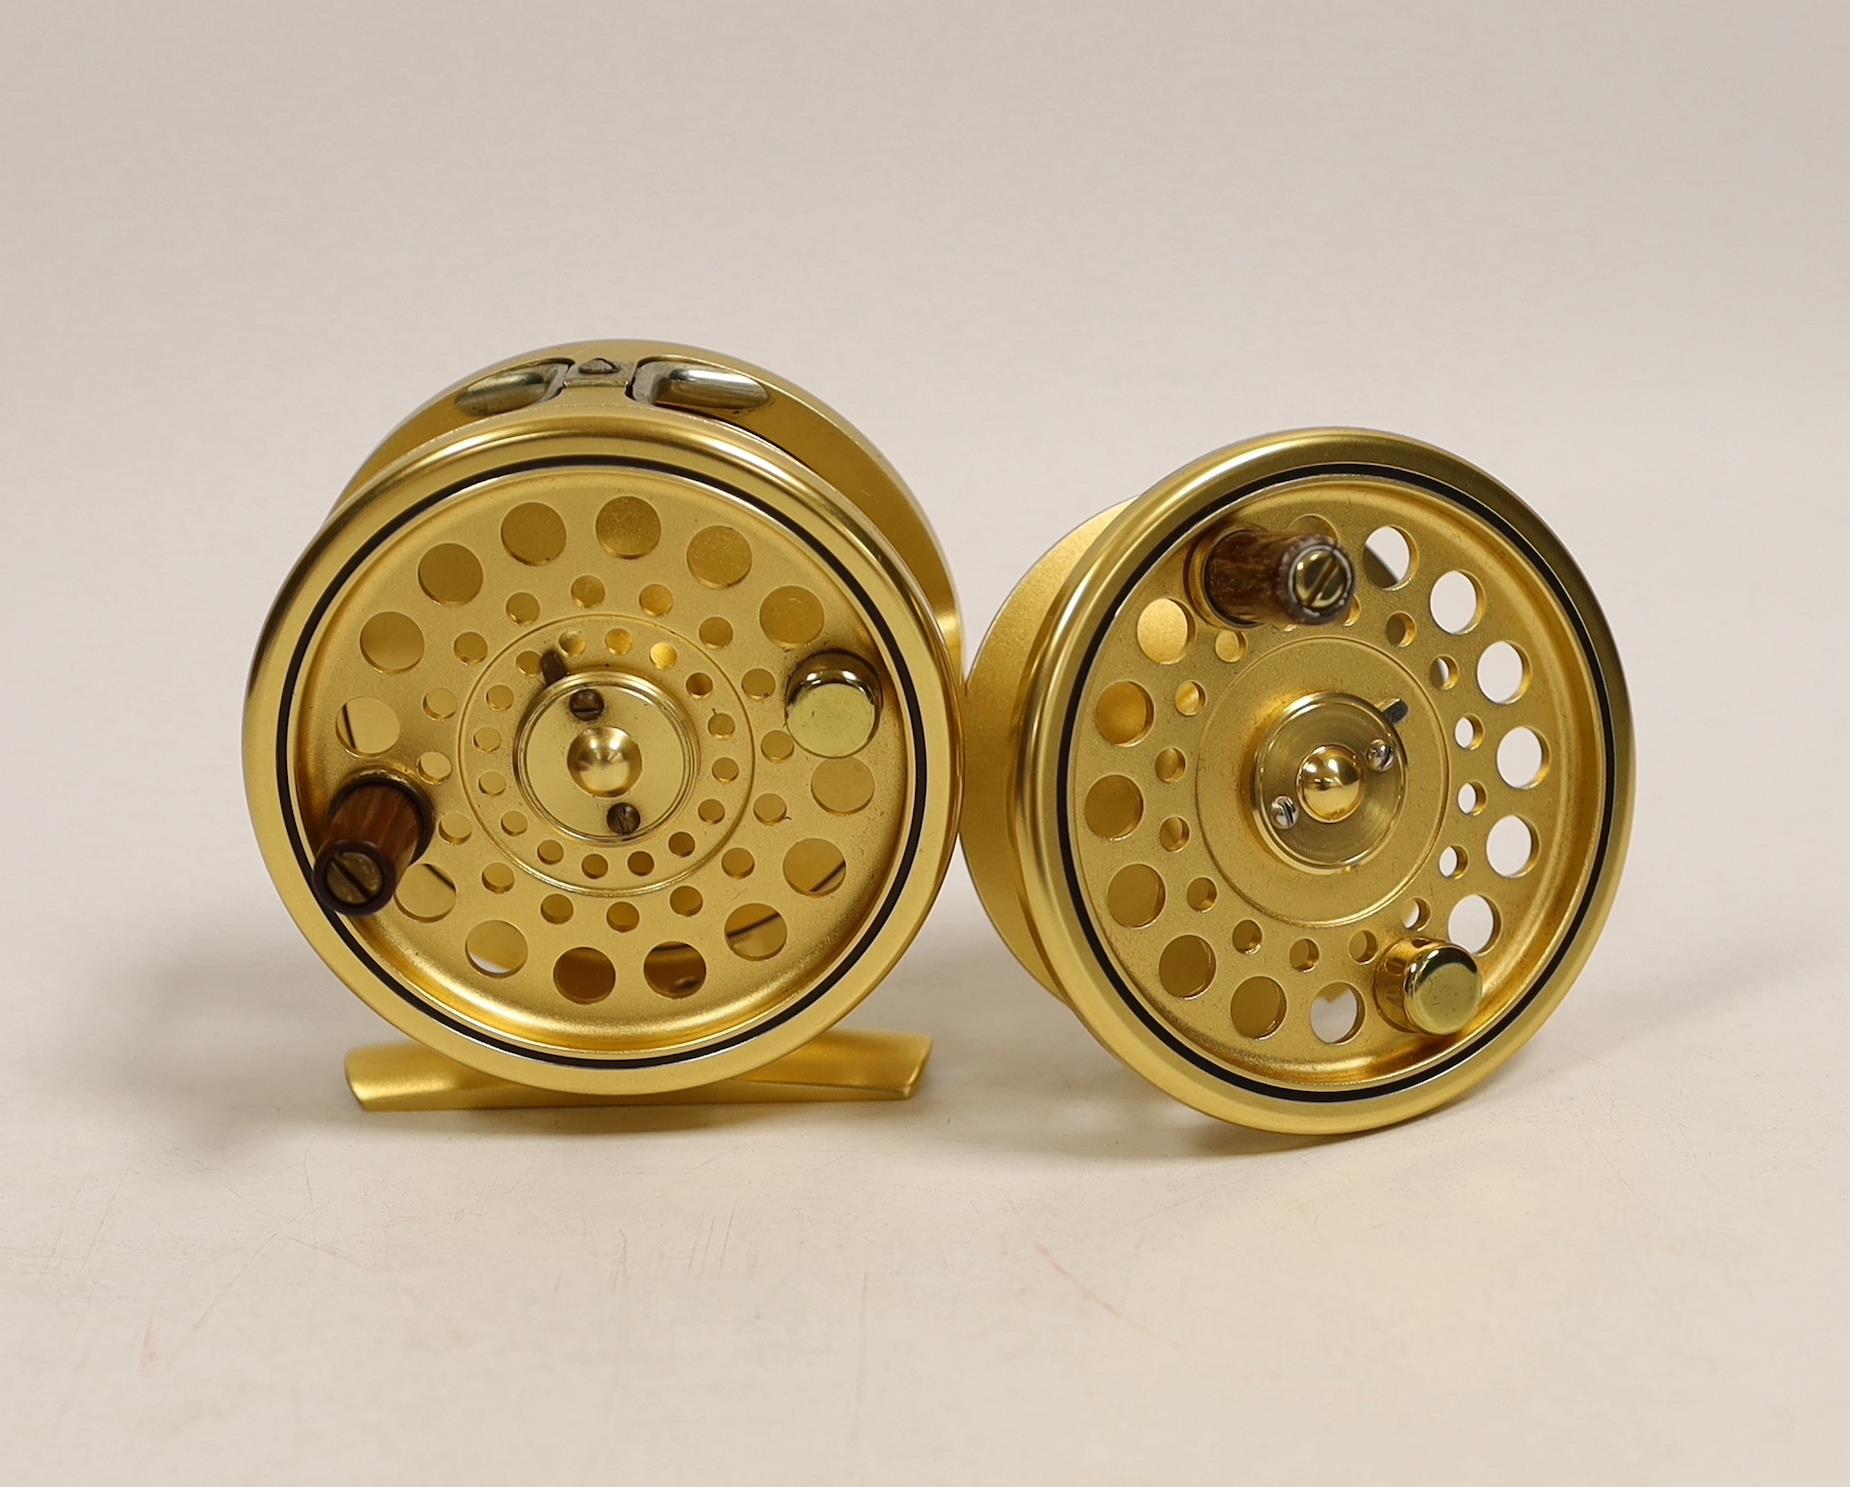 A House of Hardy Sovereign 3/4/5 centre pin fly reel, Serial Number 084 with spare spool, reel